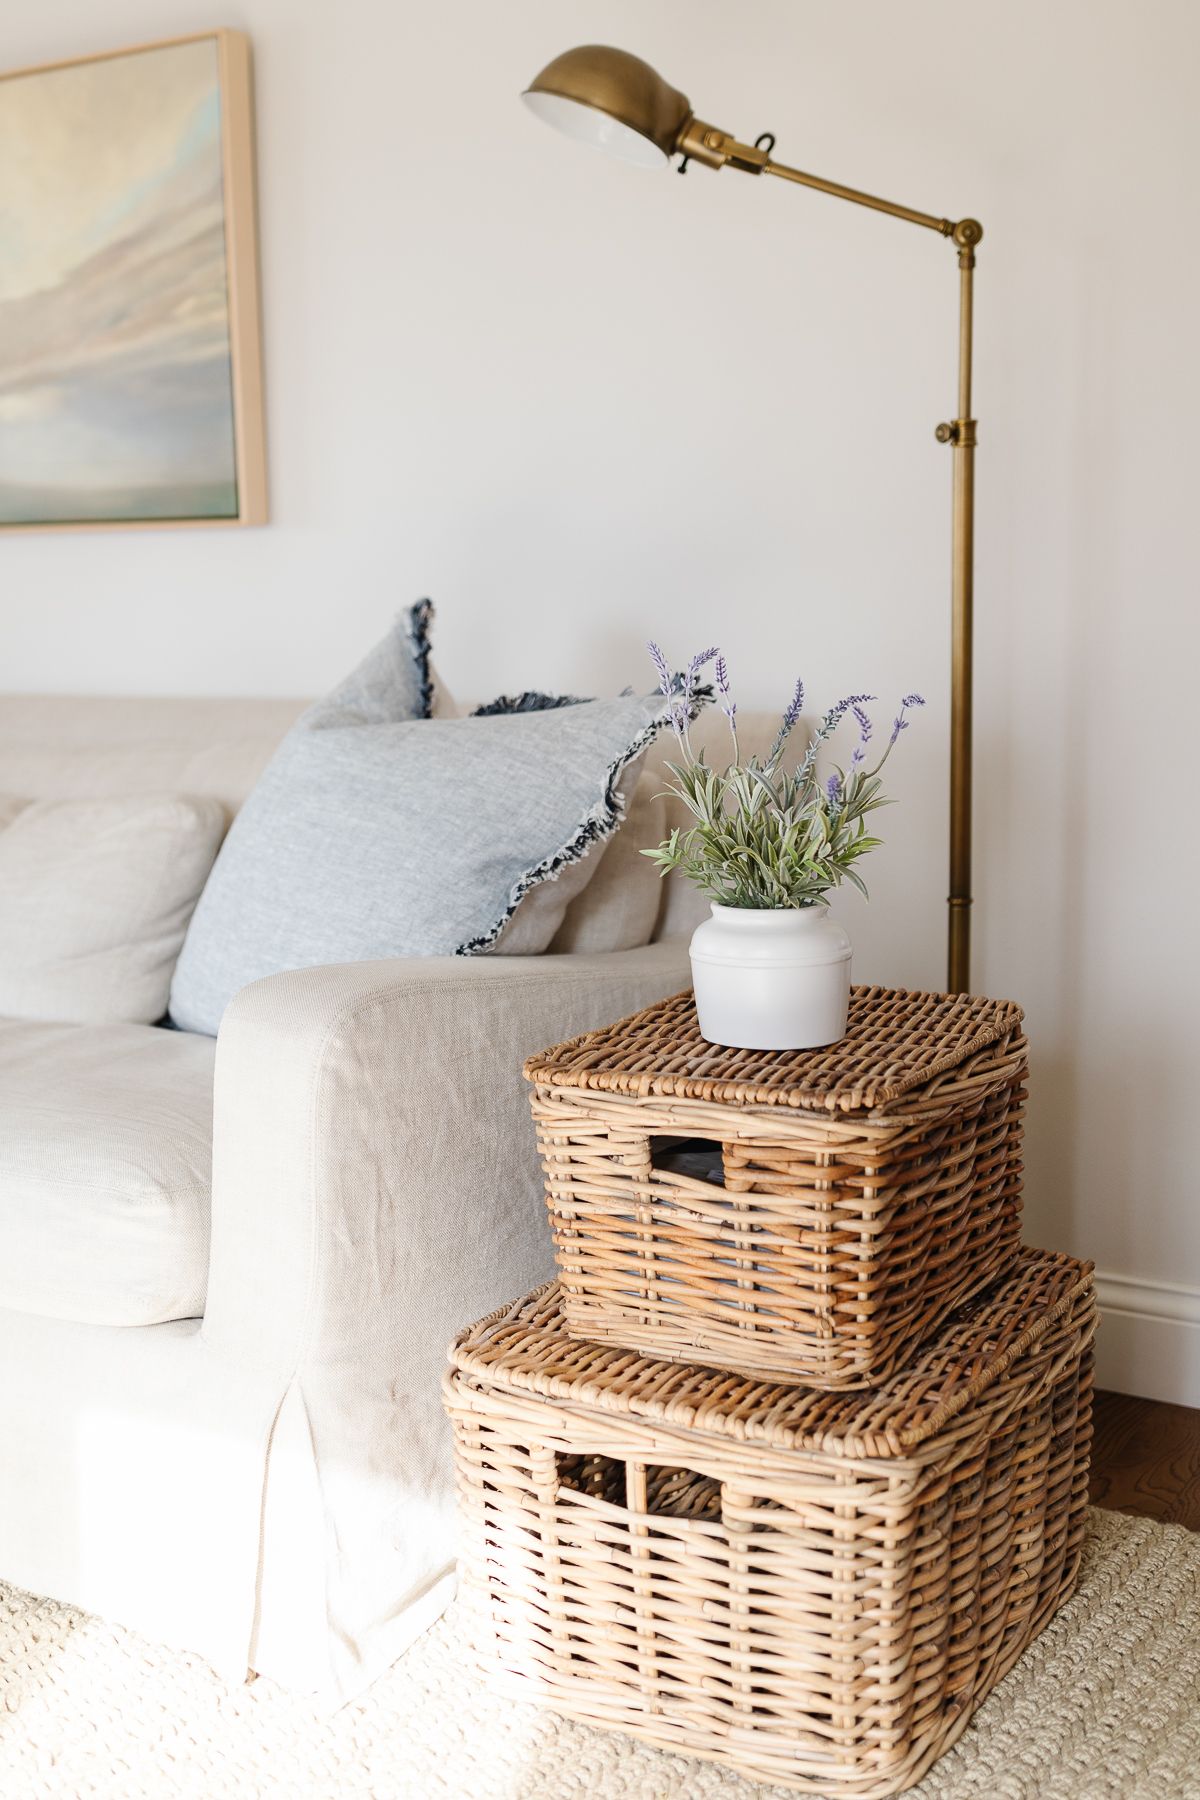 A linen sofa in a cream living room, with textural baskets as a side table